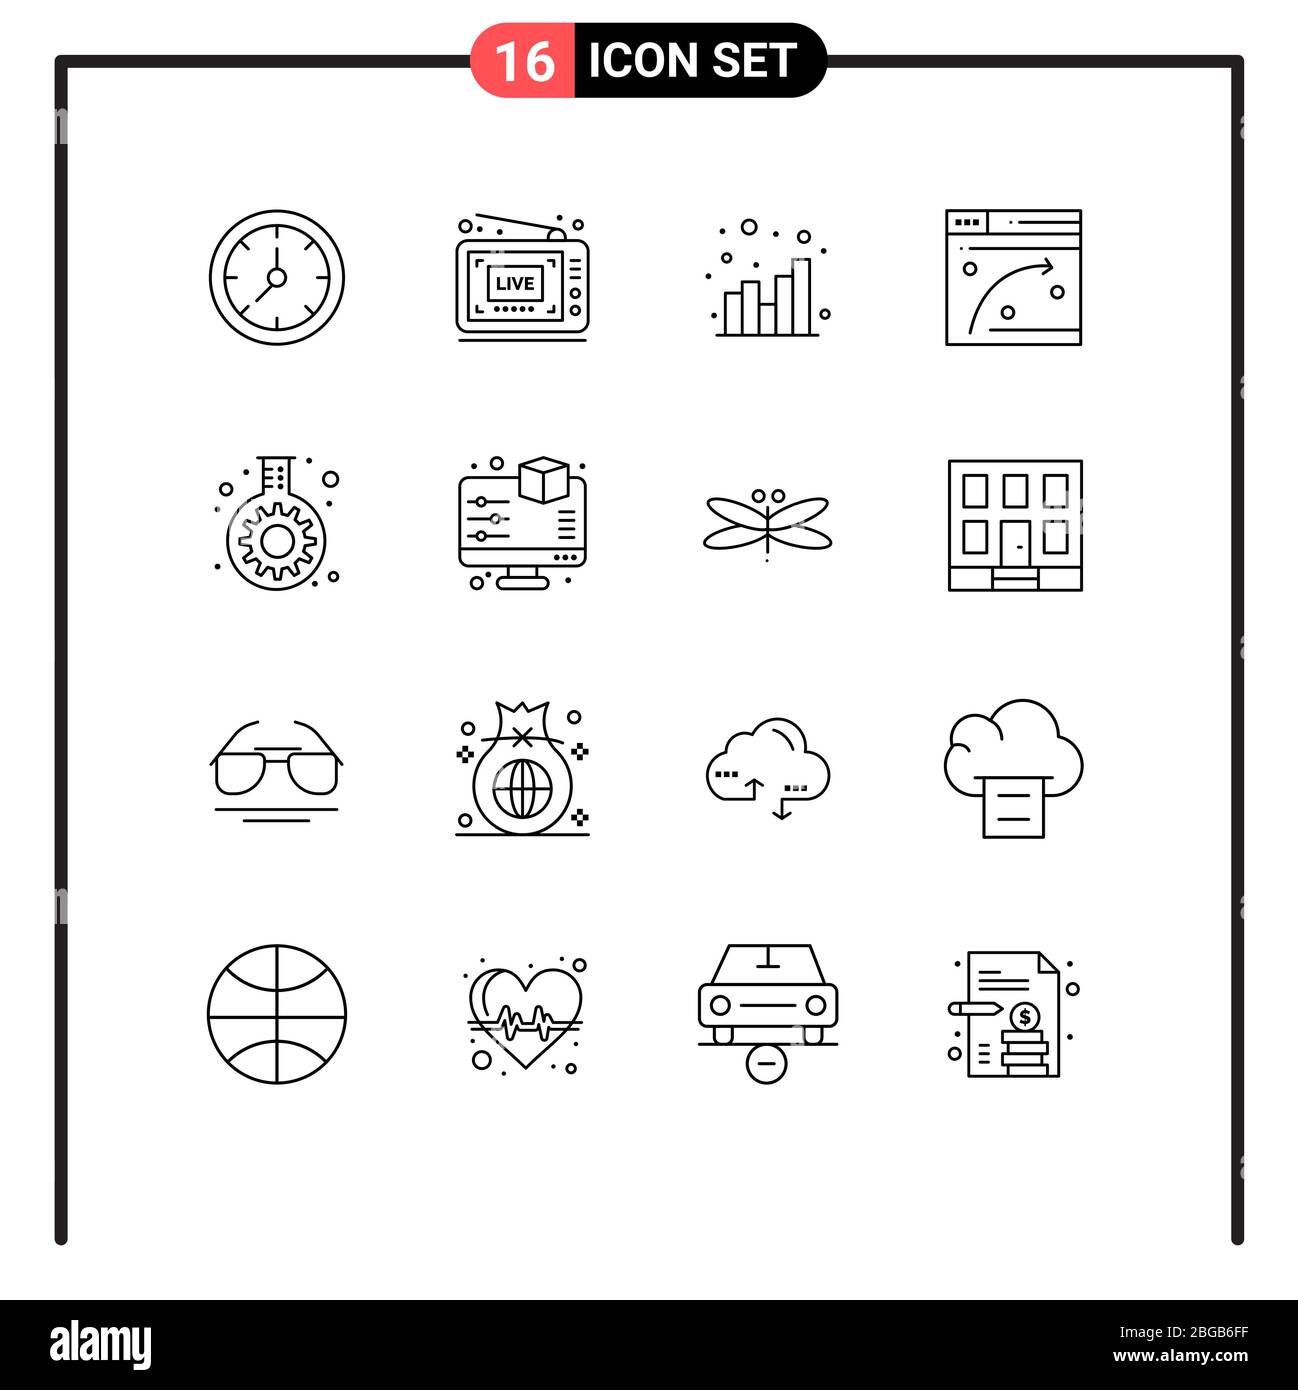 Group of 16 Outlines Signs and Symbols for flask, hosting, analytics, window, web Editable Vector Design Elements Stock Vector